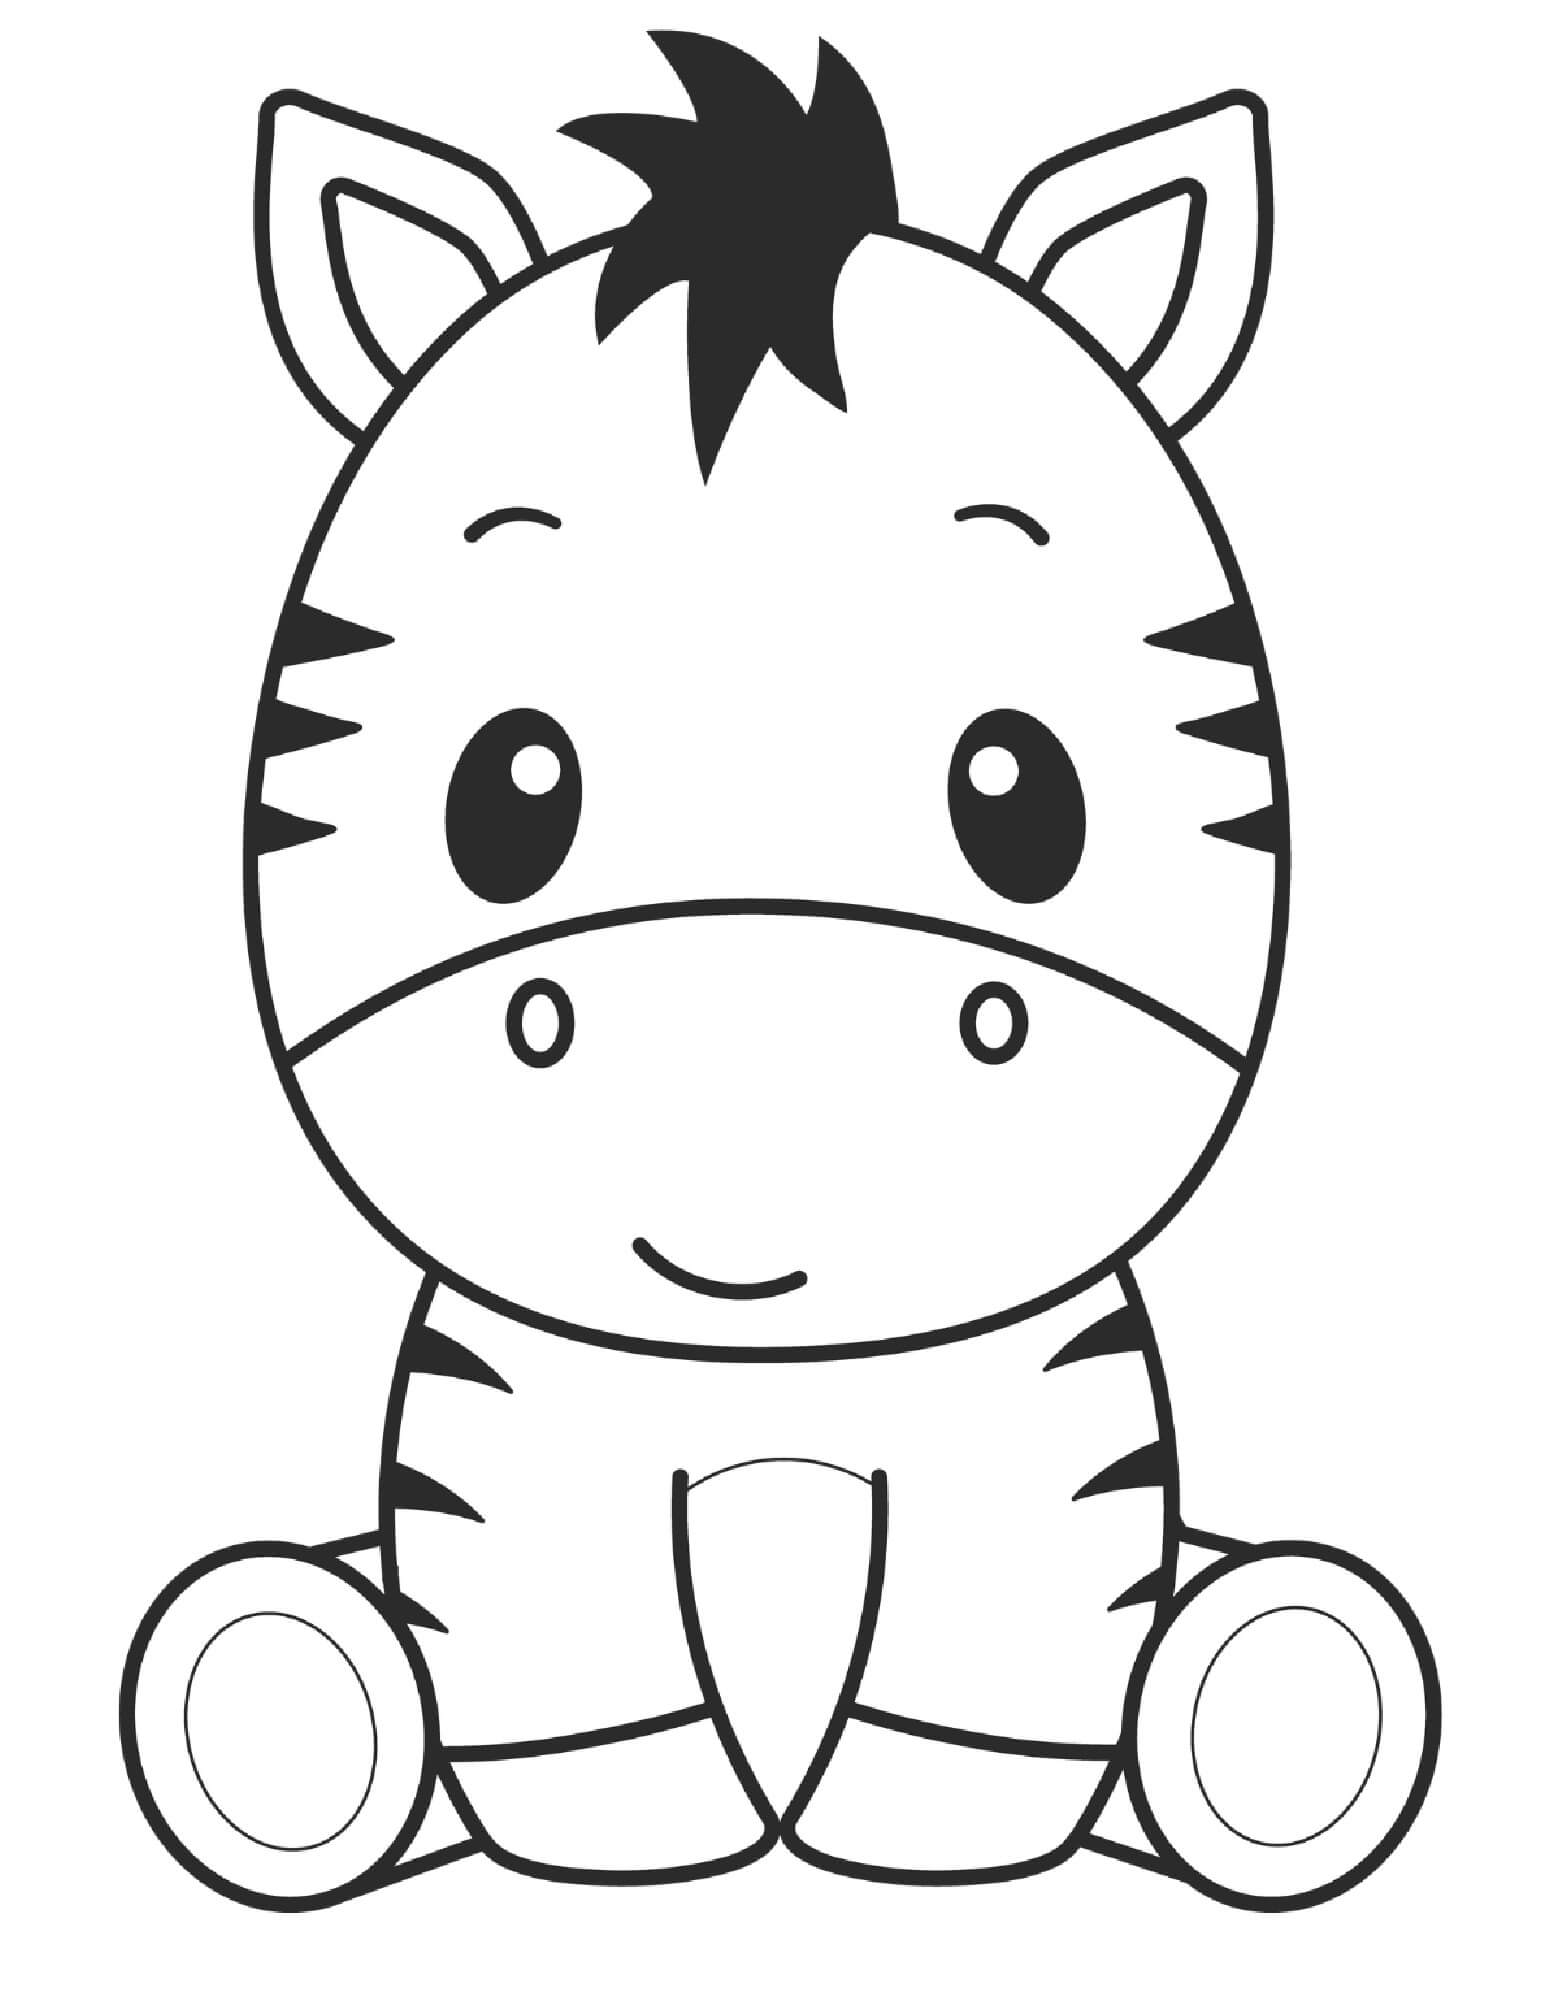 Smiling cute zebra coloring page